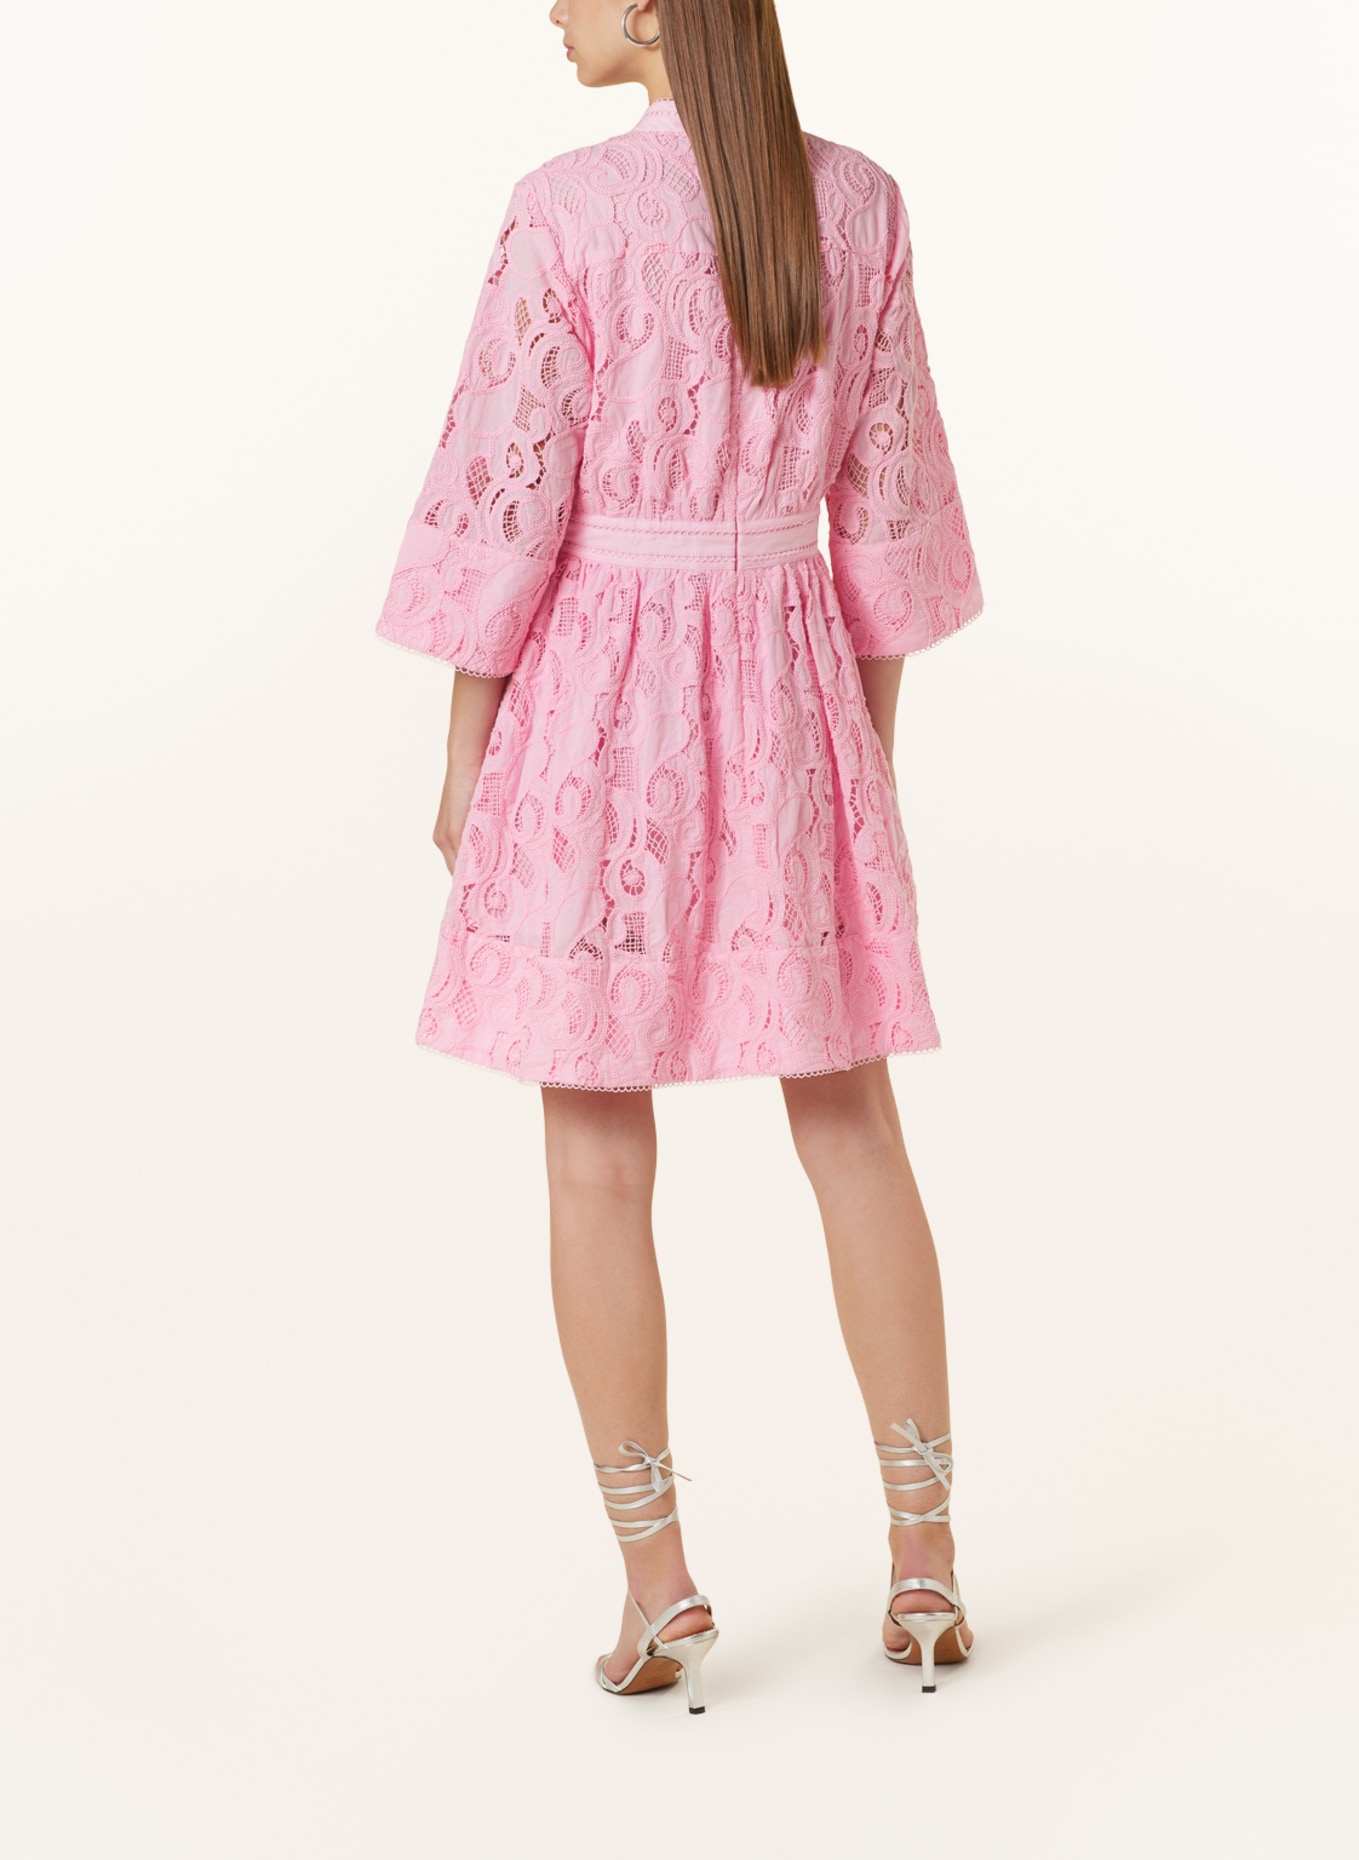 MRS & HUGS Lace dress with 3/4 sleeve, Color: PINK (Image 3)